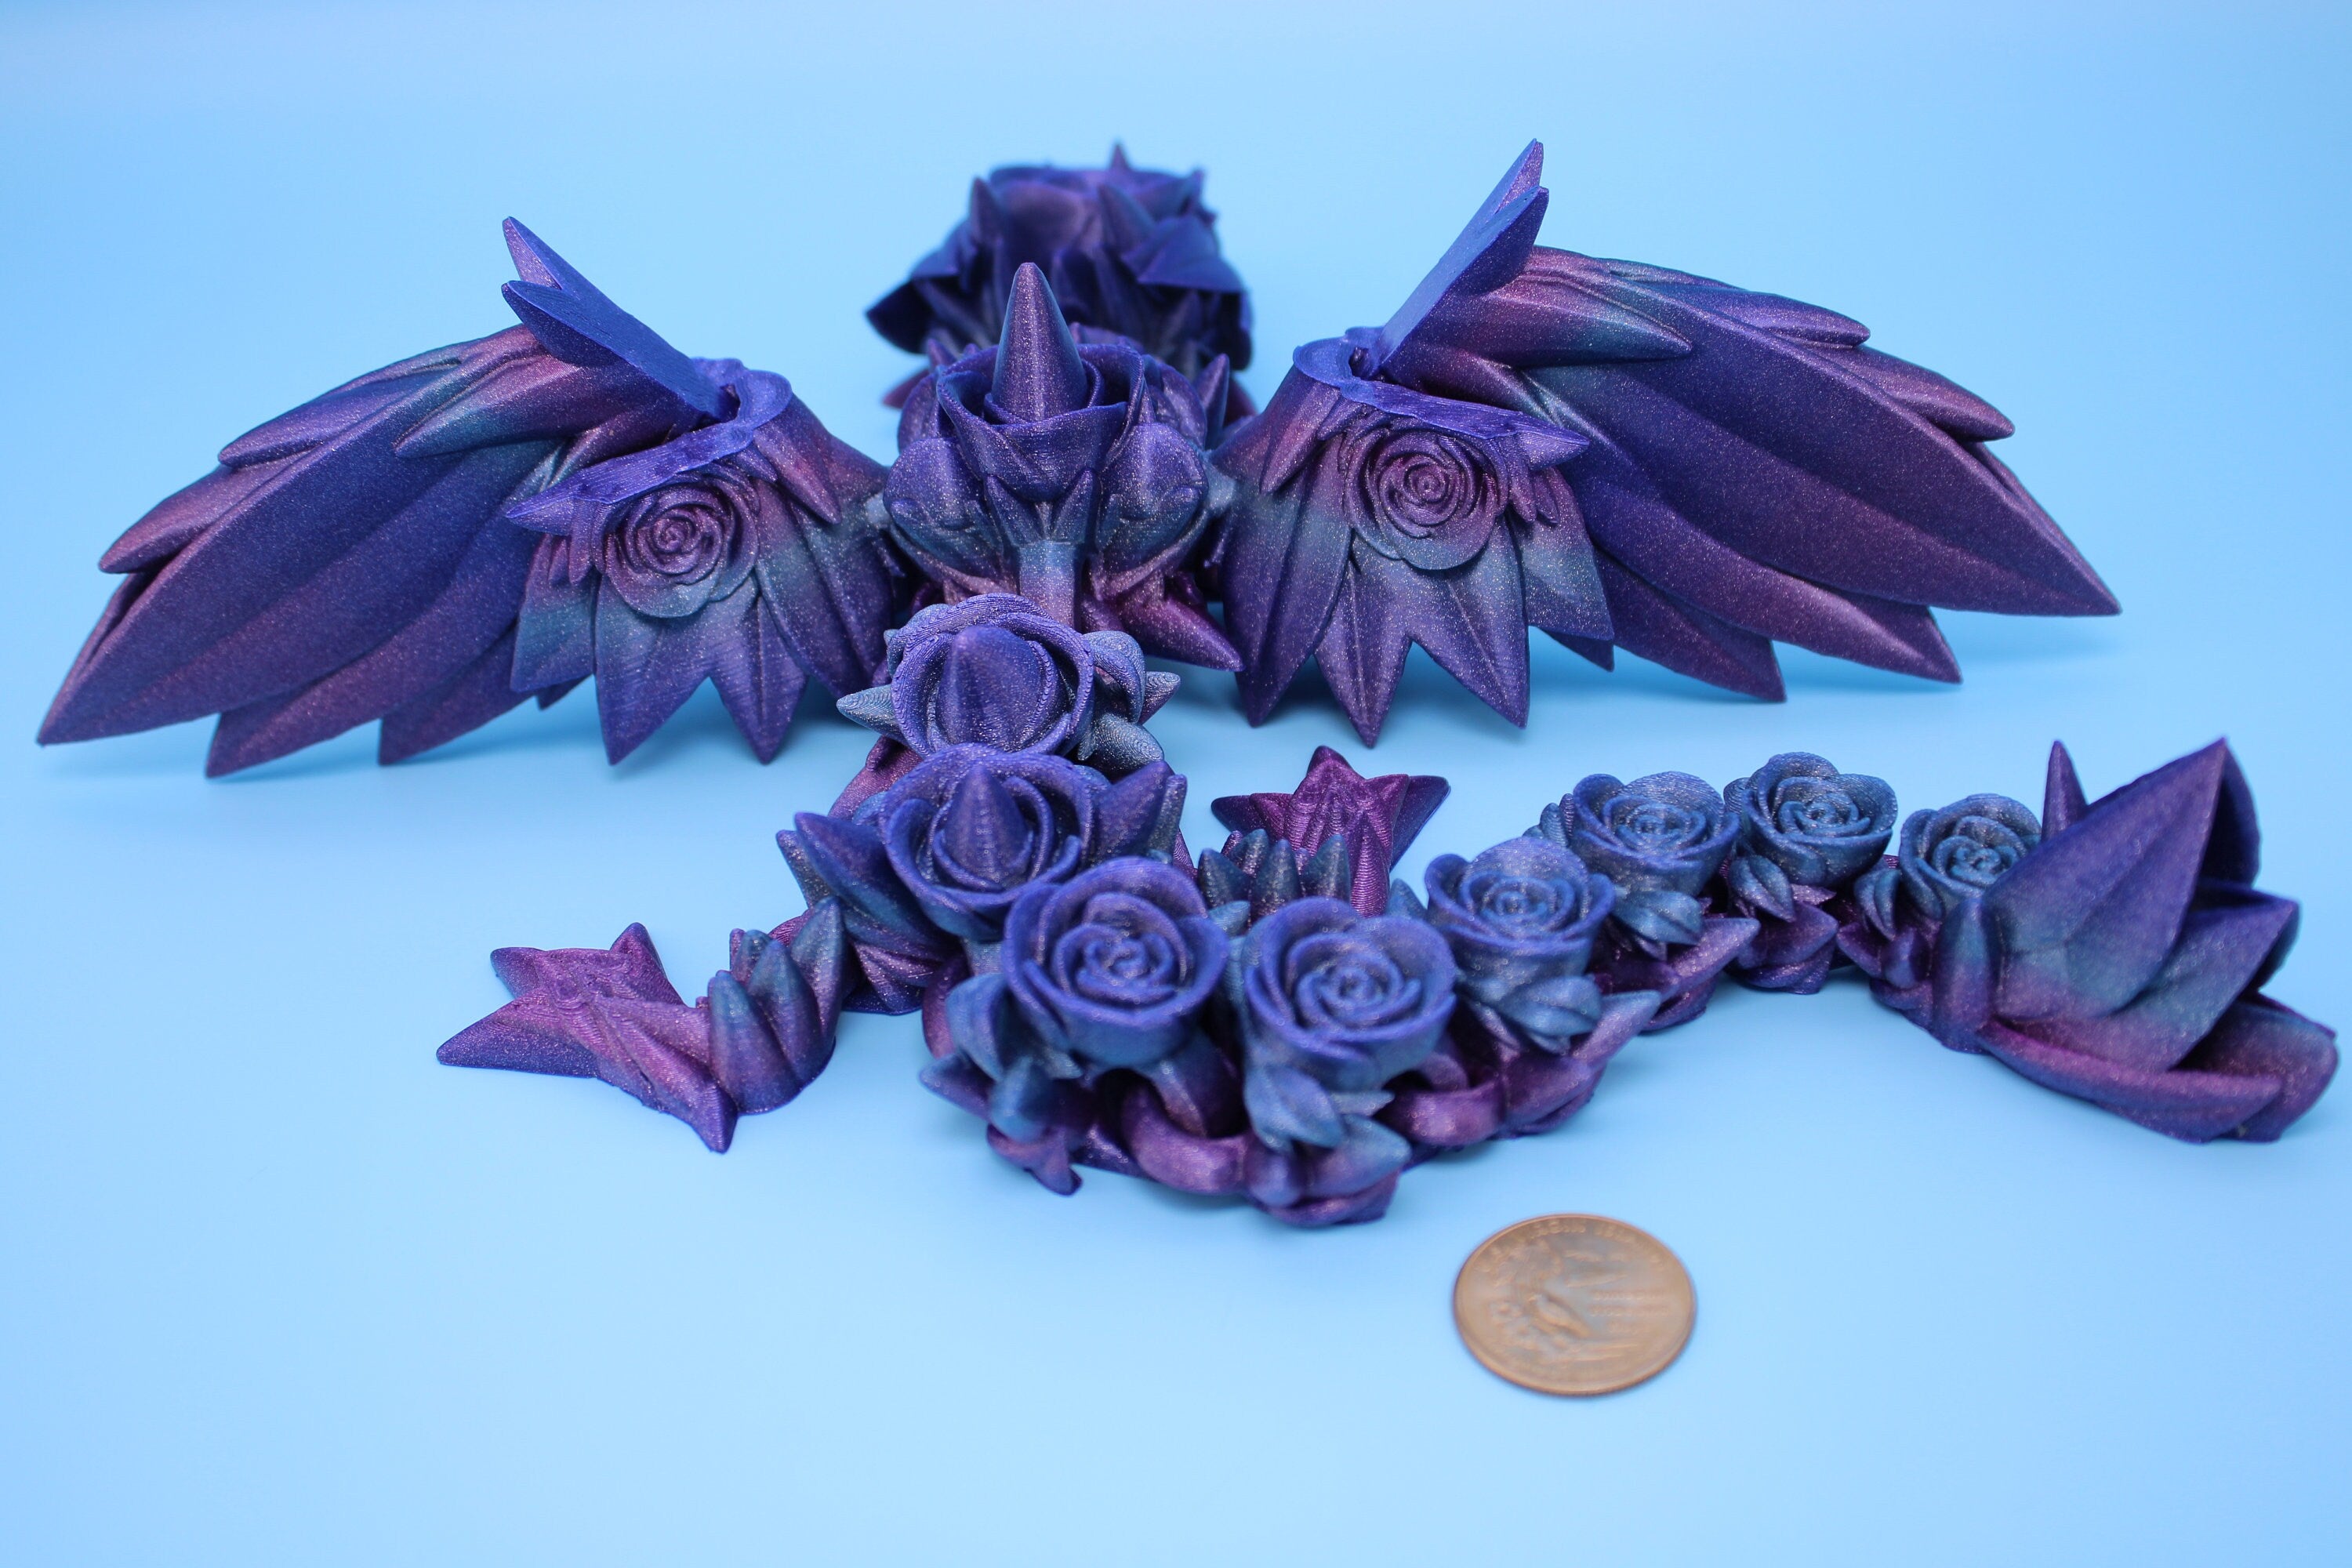 Baby Rose Wing Dragon | Rainbow | 3D printed articulating Toy Fidget | Flexi Toy 15 in. head to tail | Stress Relief Gift